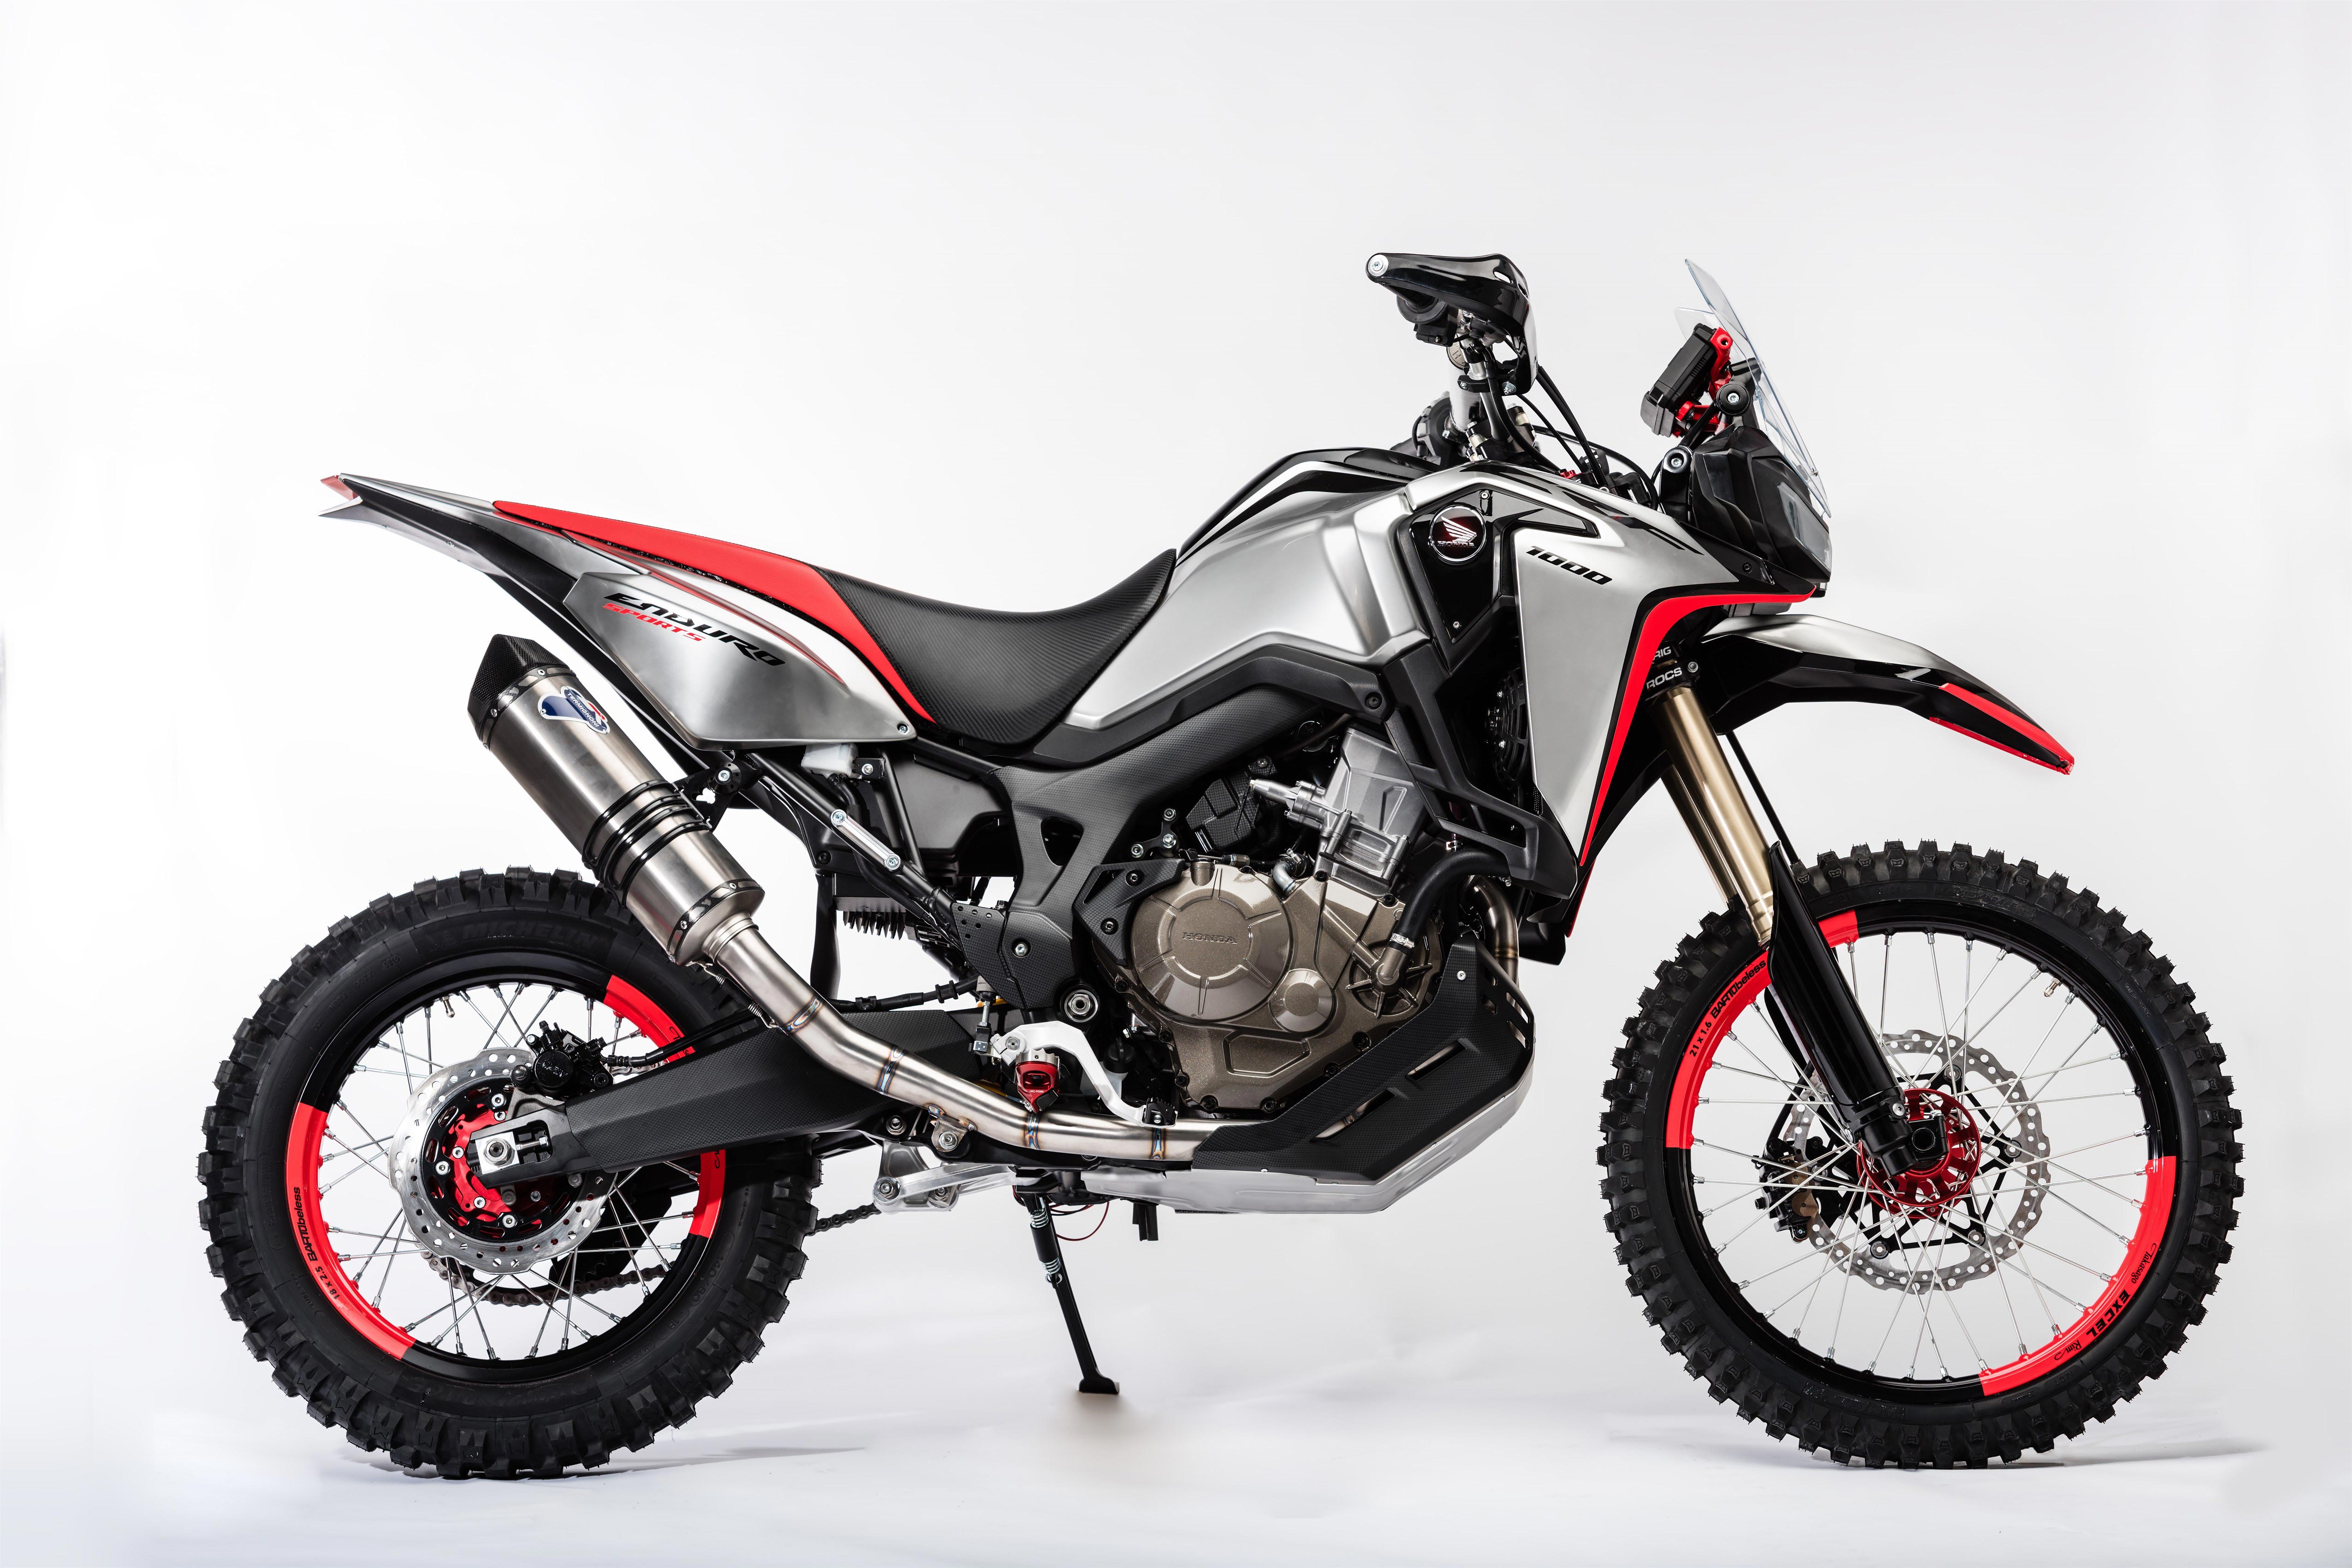 Oh My! The Honda Africa Twin Enduro Sports Concept